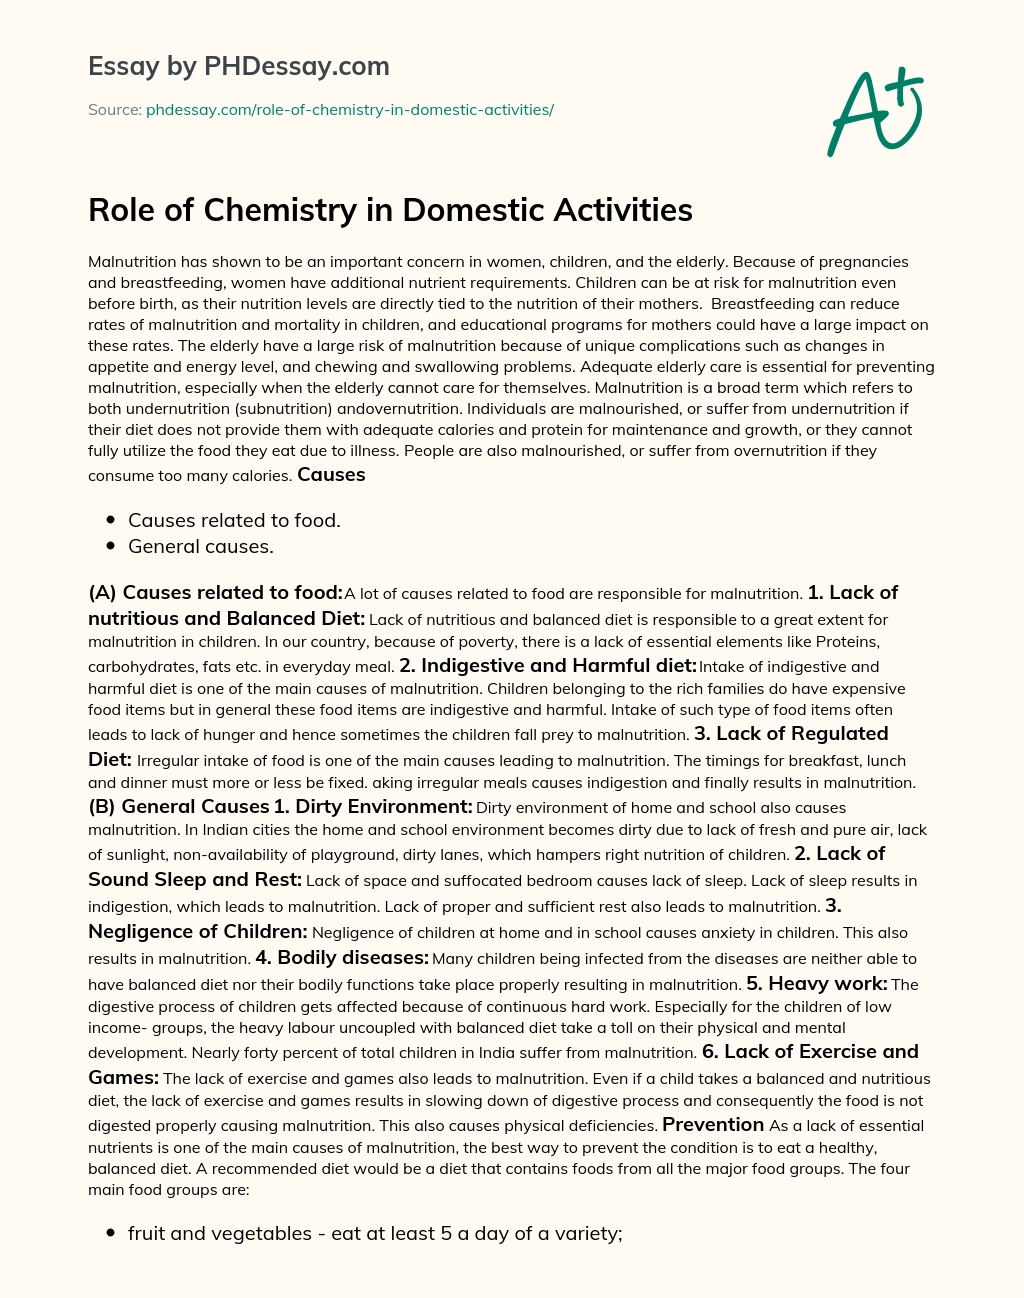 role of chemistry in domestic activities